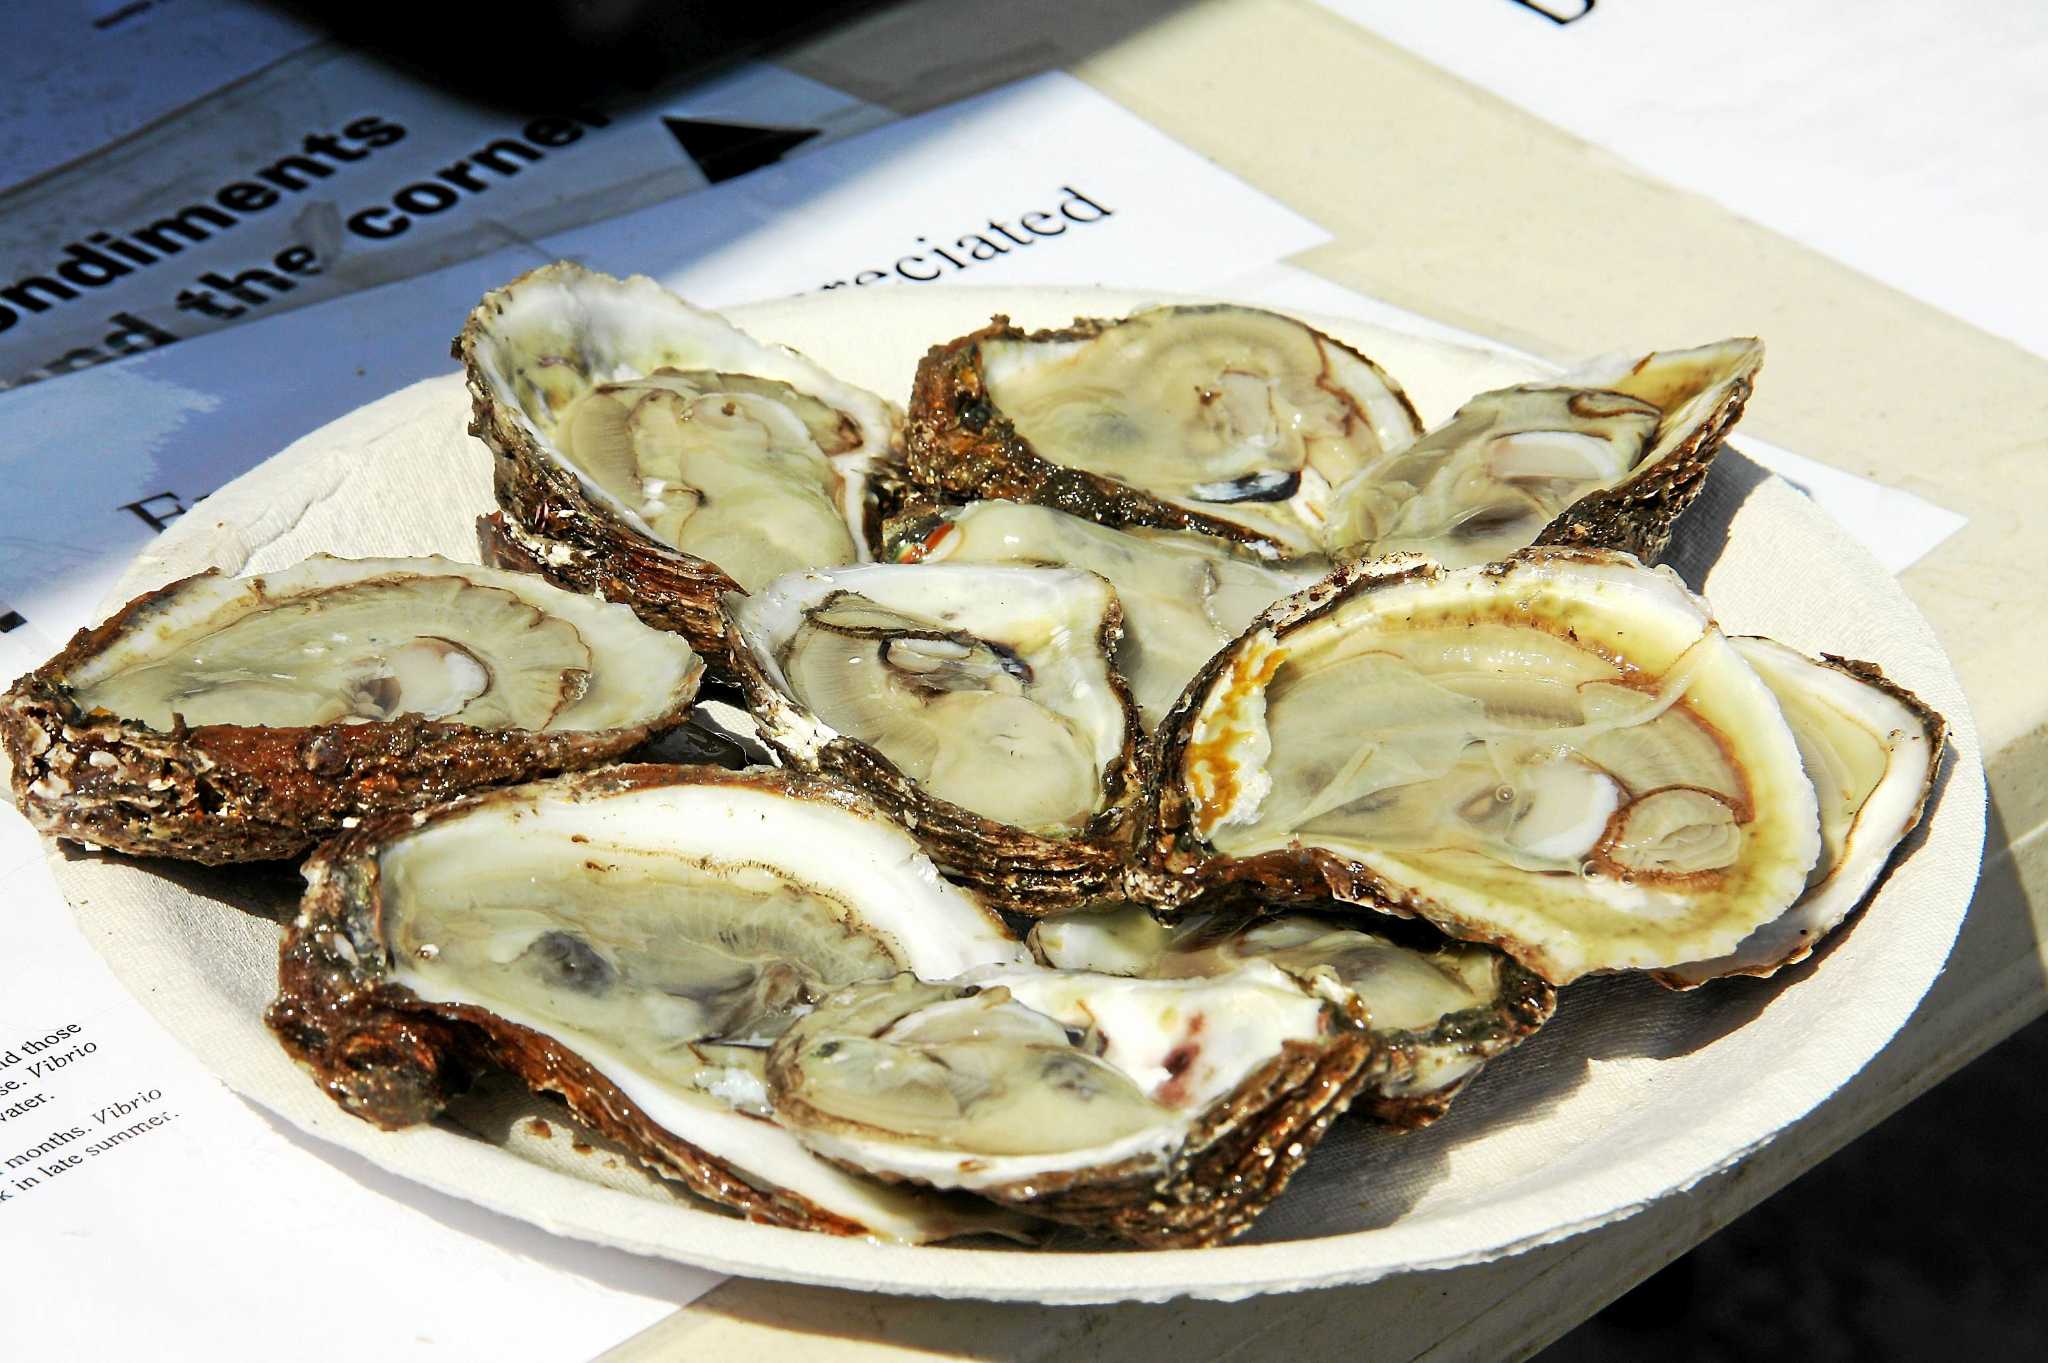 Milford set for 41st annual Oyster Fest Friday, Saturday